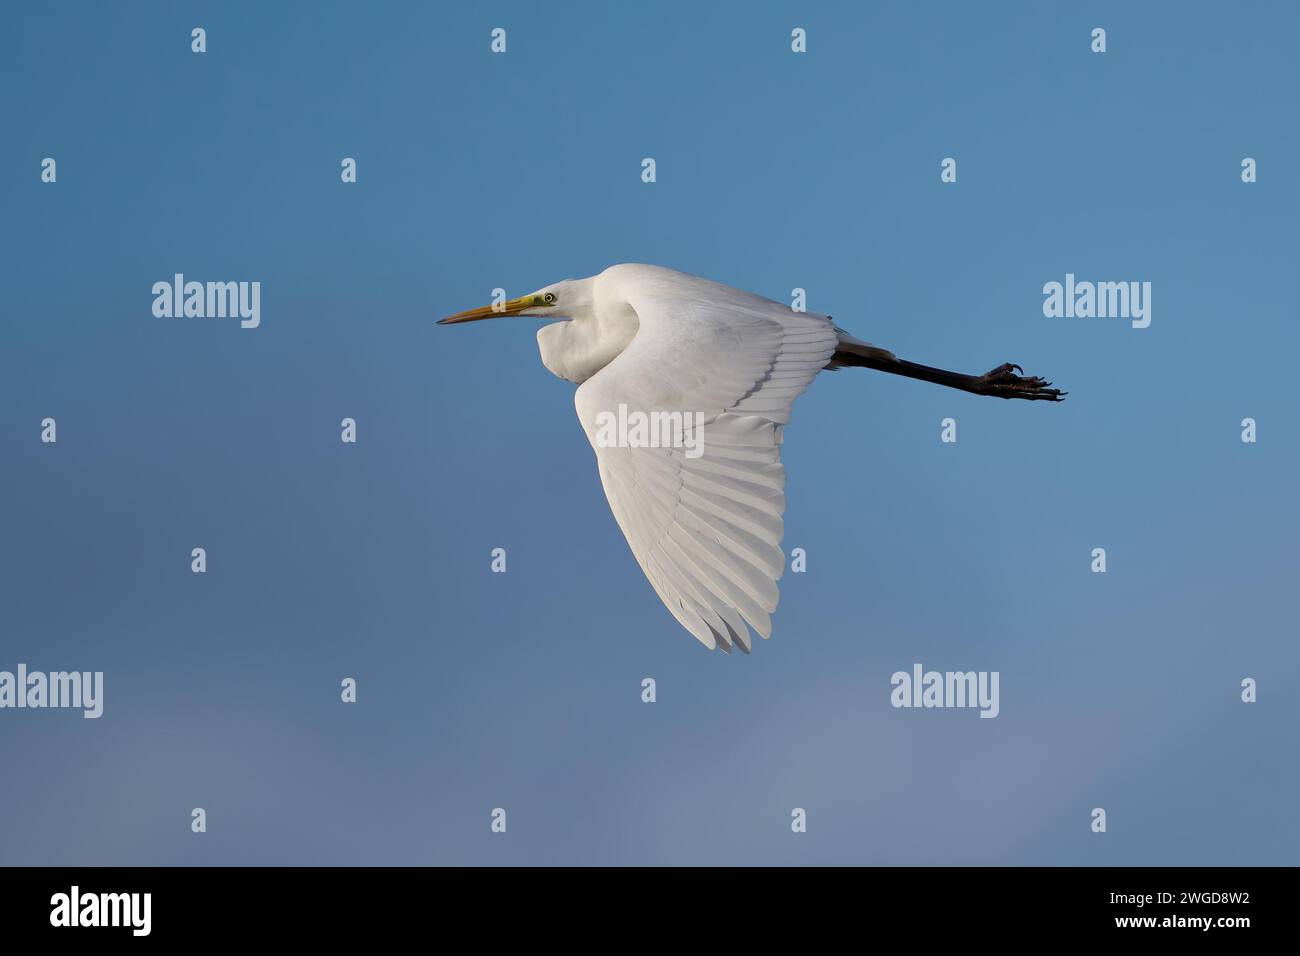 Great egret (Ardea alba) in its natural environment Stock Photo